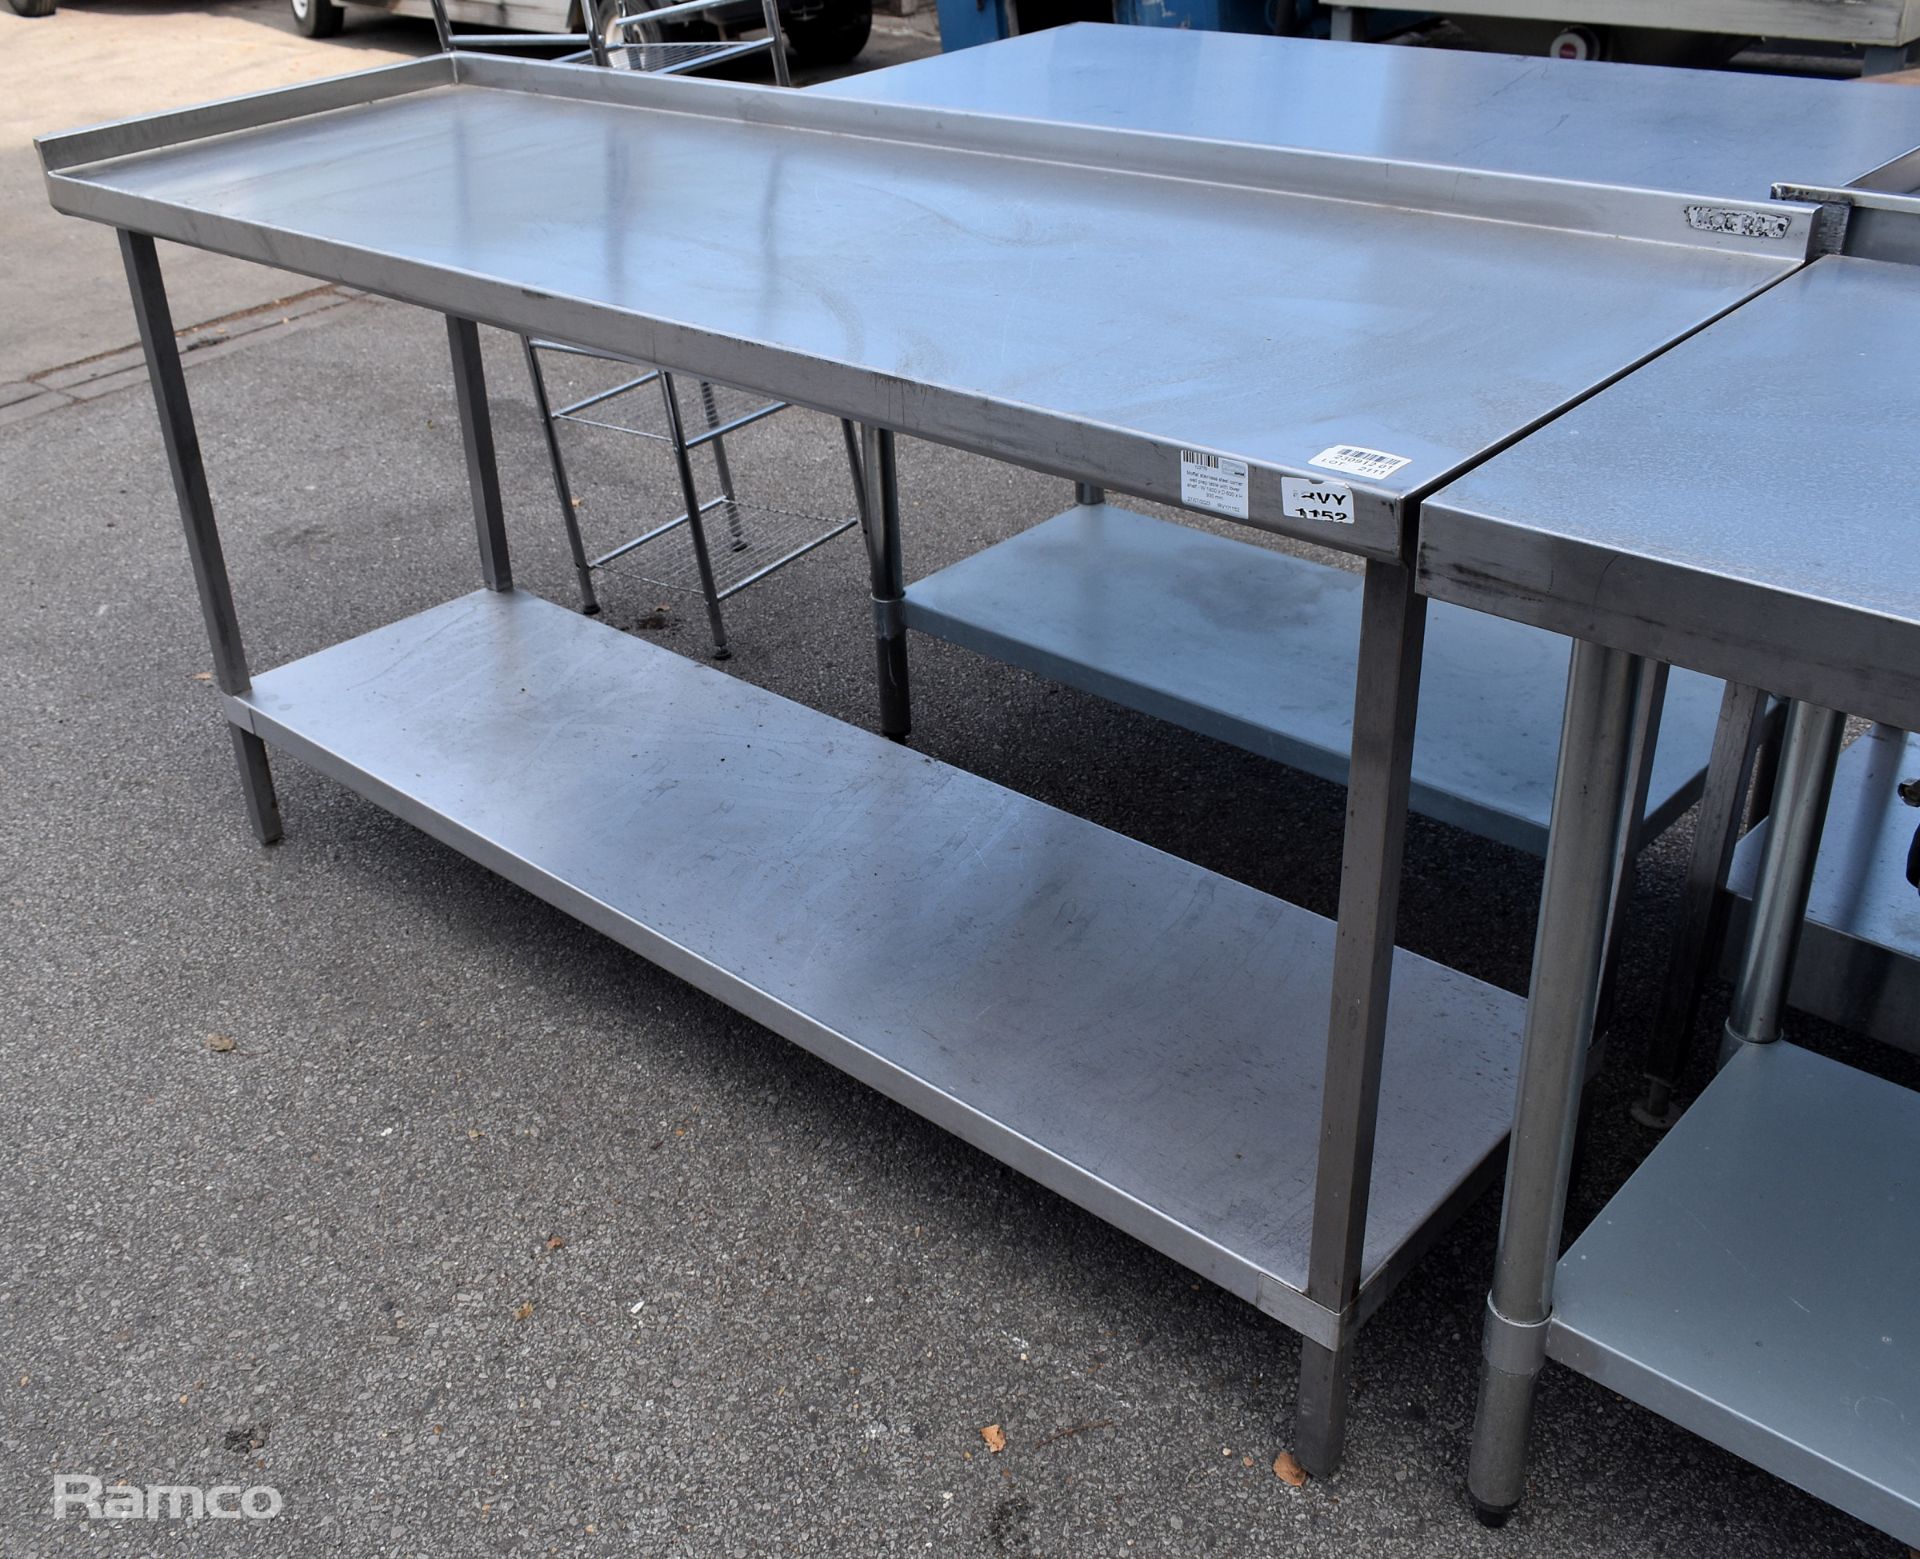 Moffat stainless steel prep table with lower shelf - W 1800 x D 600 x H 930mm - Image 3 of 3